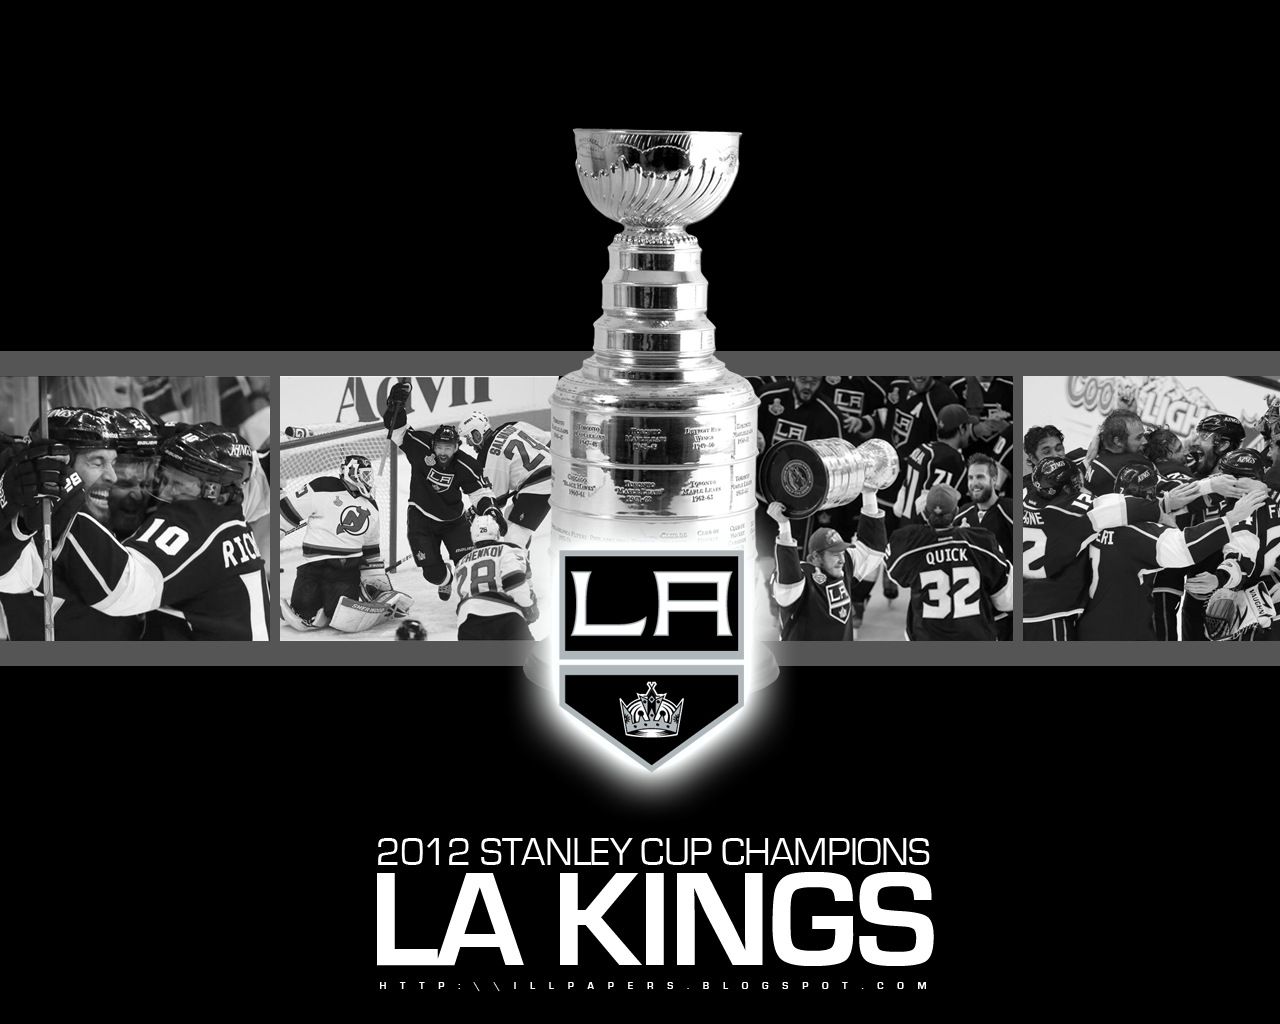 Wallpaper Background More Stanley Cup Champions La Kings